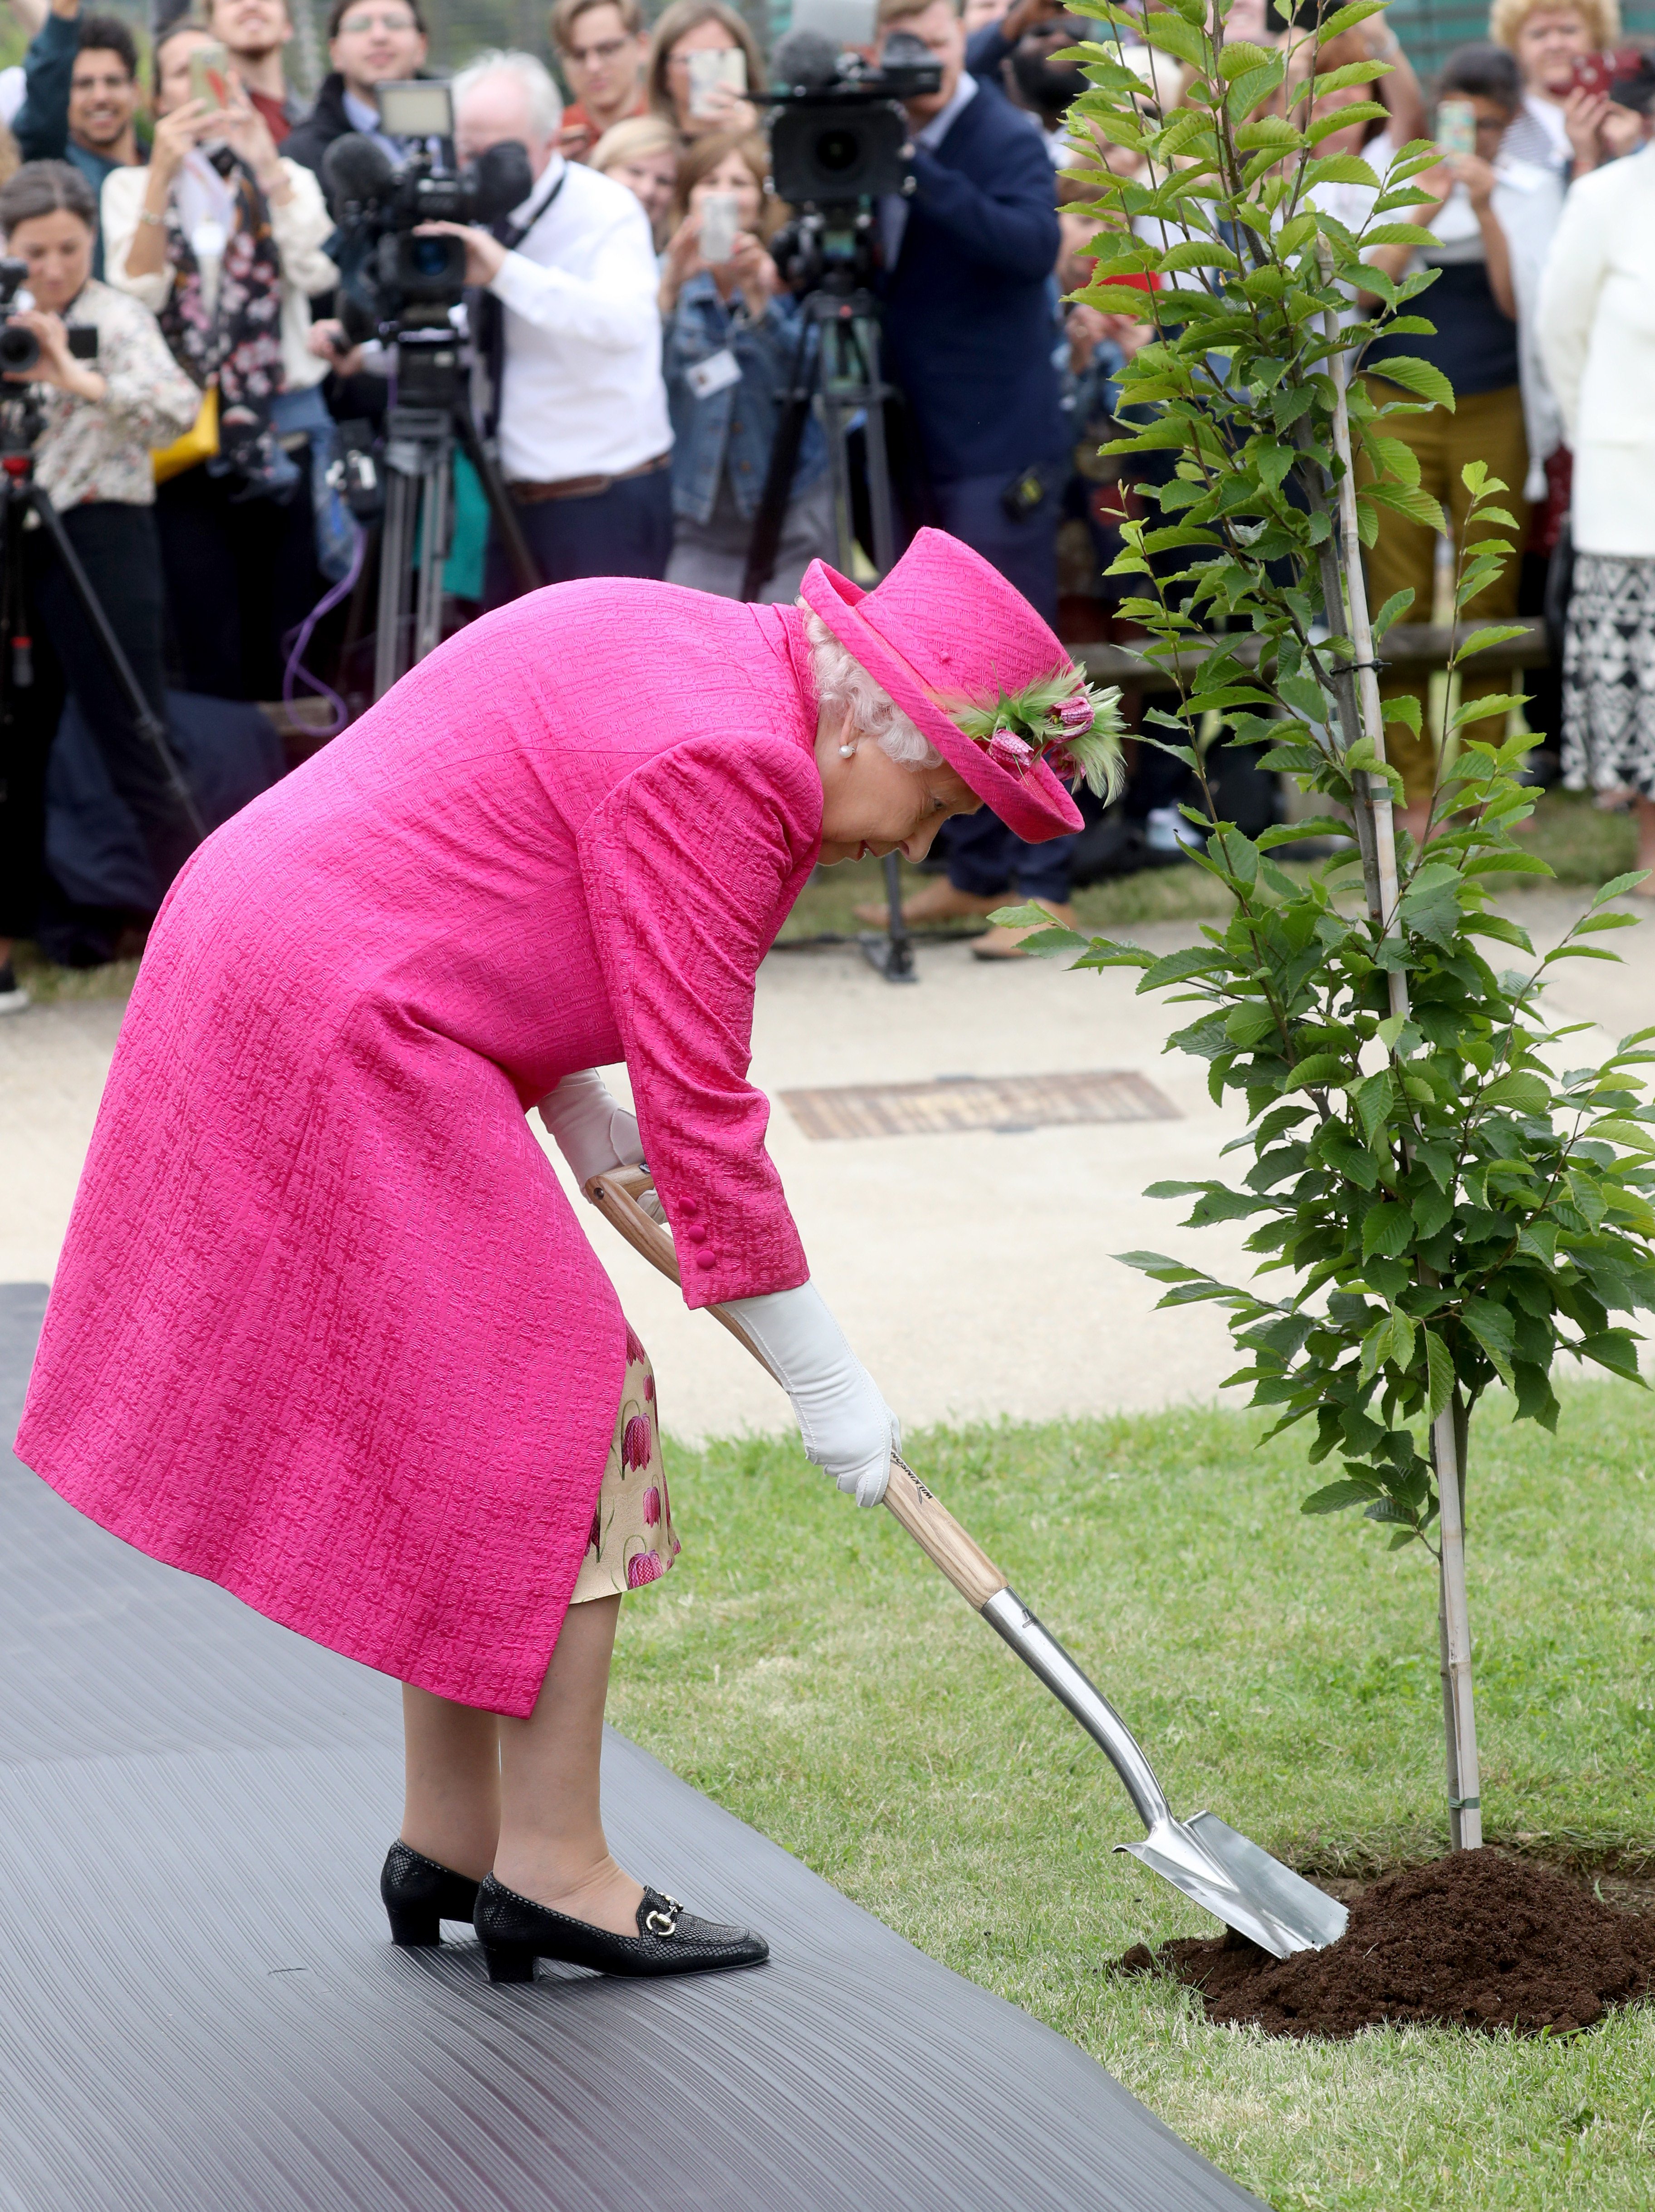 Queen Elizabeth II plants a tree at the National Institute of Agricultural Botany in July 2019 | Source Getty Images